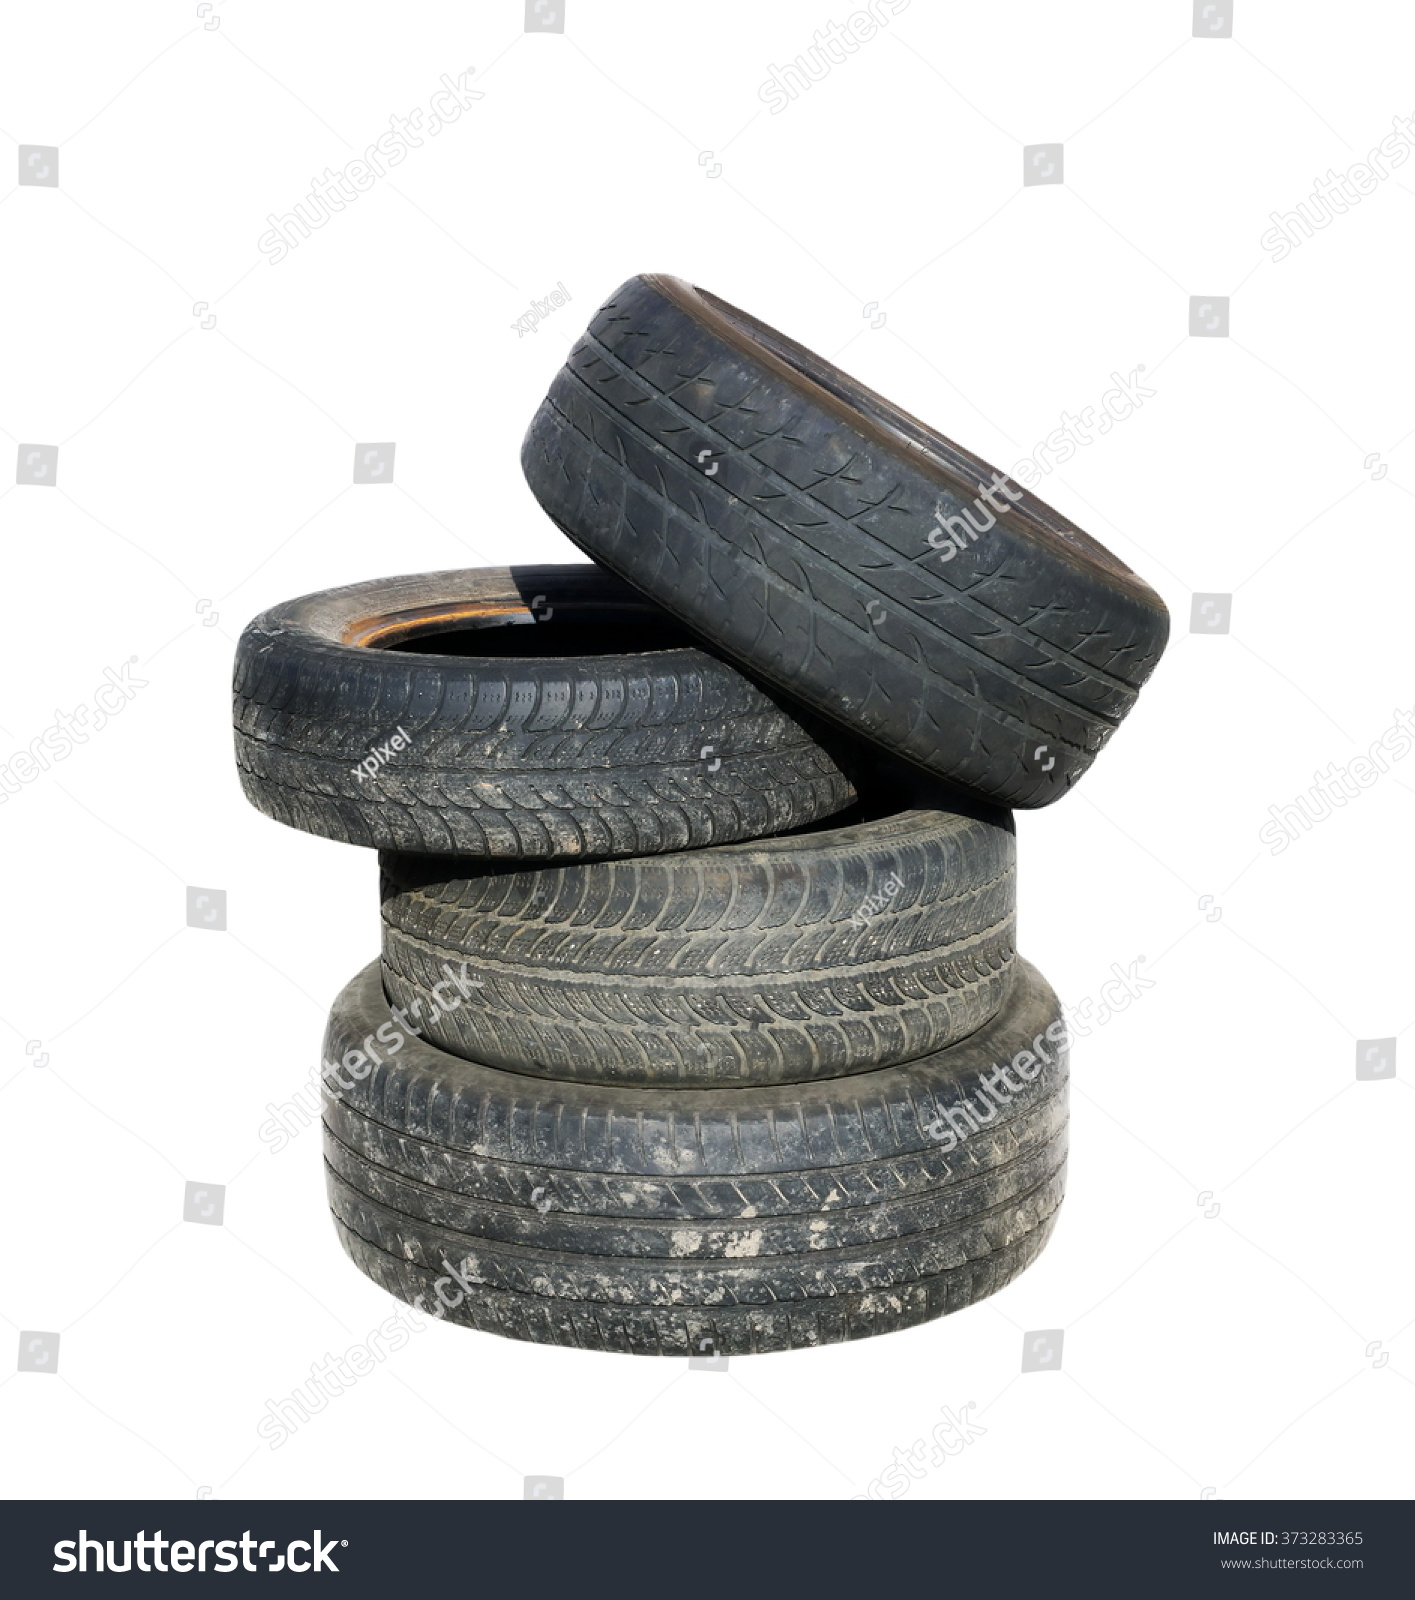 Old tires stacked, isolated on white background #373283365